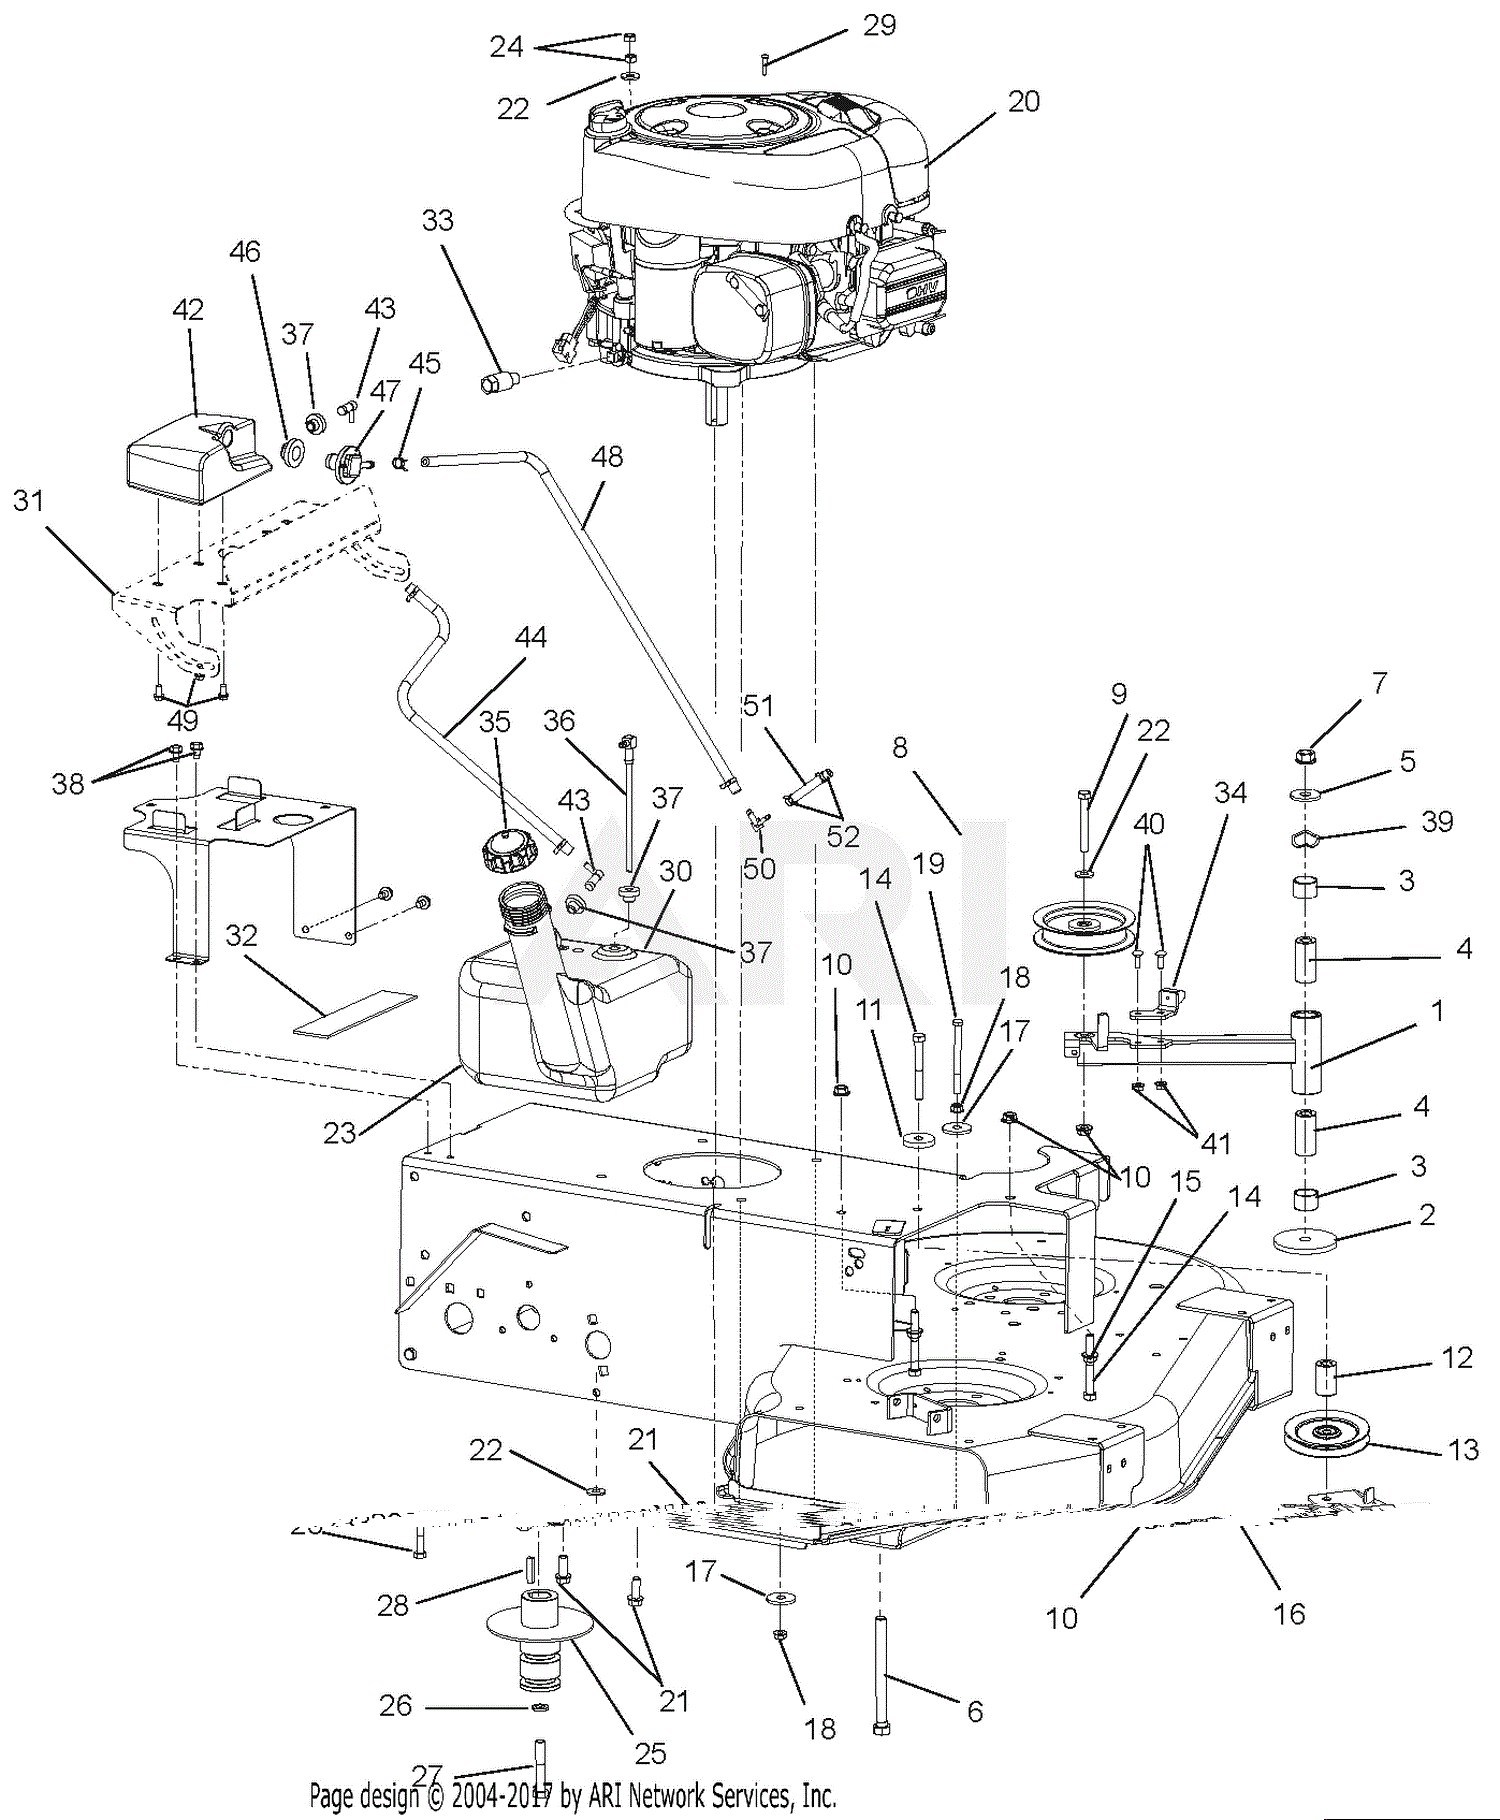 Lawn Mower Engine Parts Diagram Gravely Waw 34 14 5hp Briggs N Of Lawn Mower Engine Parts Diagram